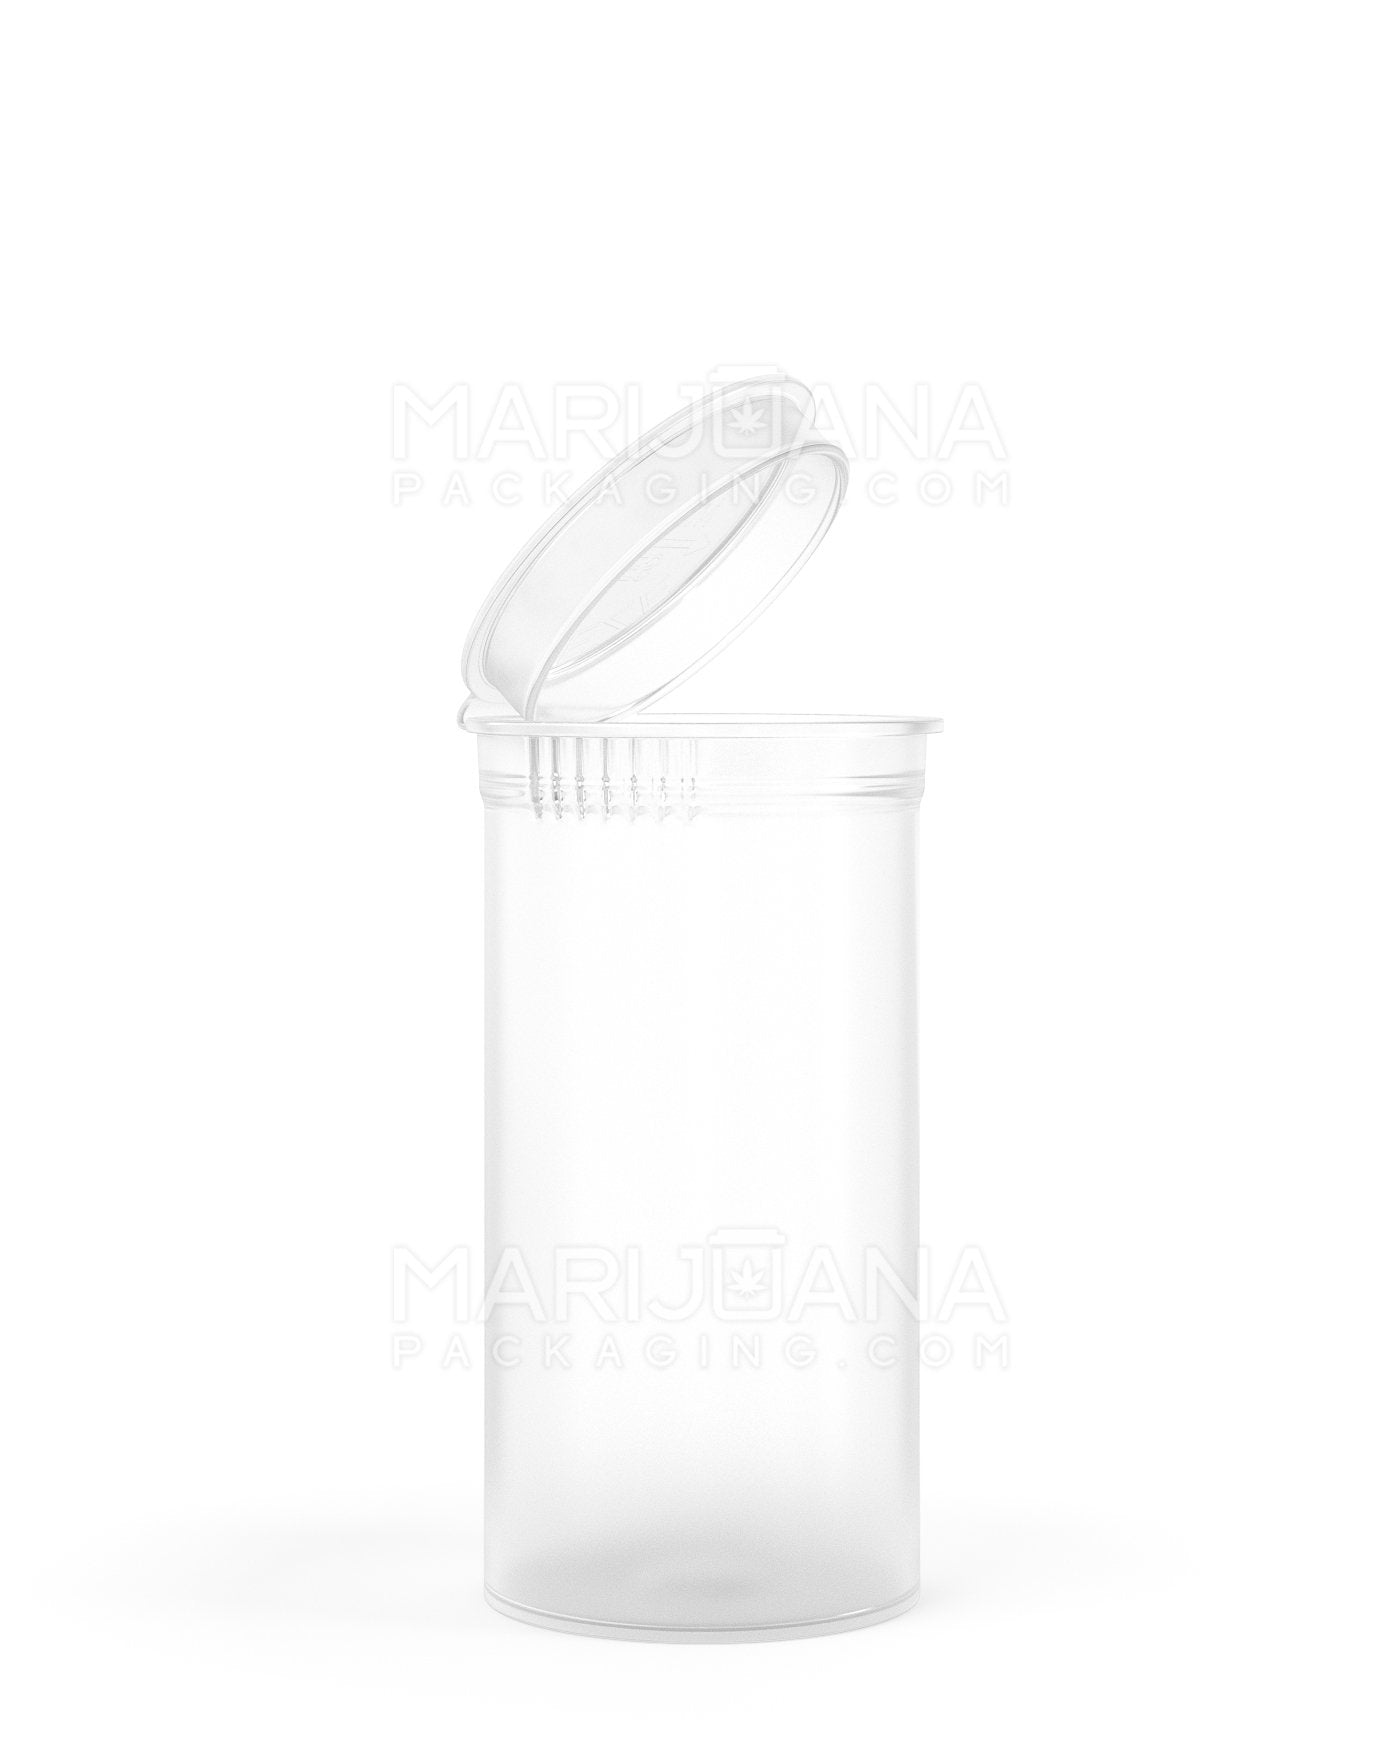 Child Resistant & Sustainable 100% Biodegradable Clear Pop Top Bottles | 13dr - 2g | Sample - 1